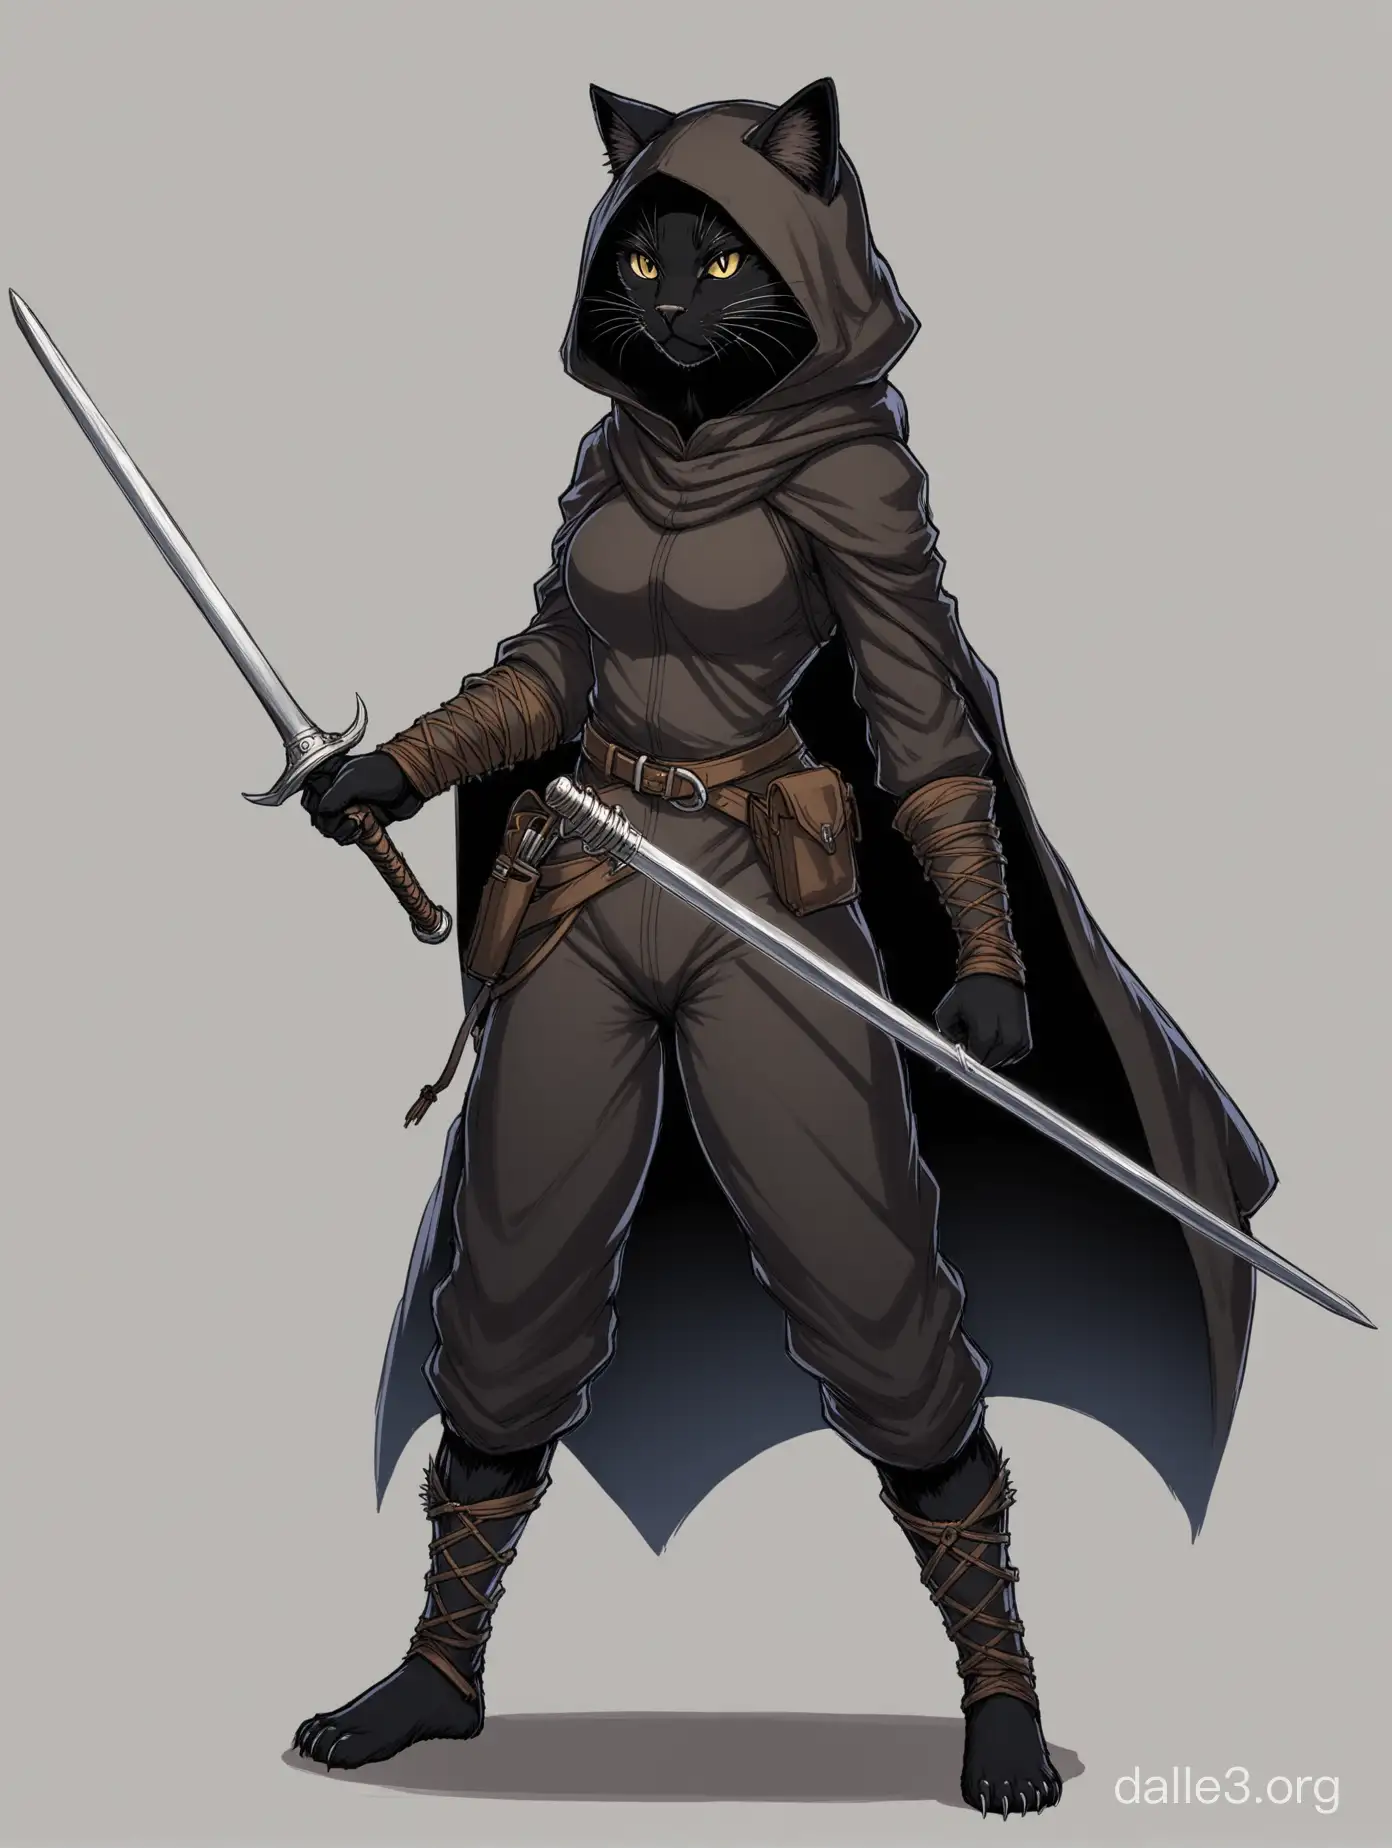 Catfolk Tabaxi female rogue holding a rapier. Inspired by a black panther cat. Wearing adventuring gear with the cloak's hood down. Black fur showing, no skin. Fencing stance. Full body portrait 